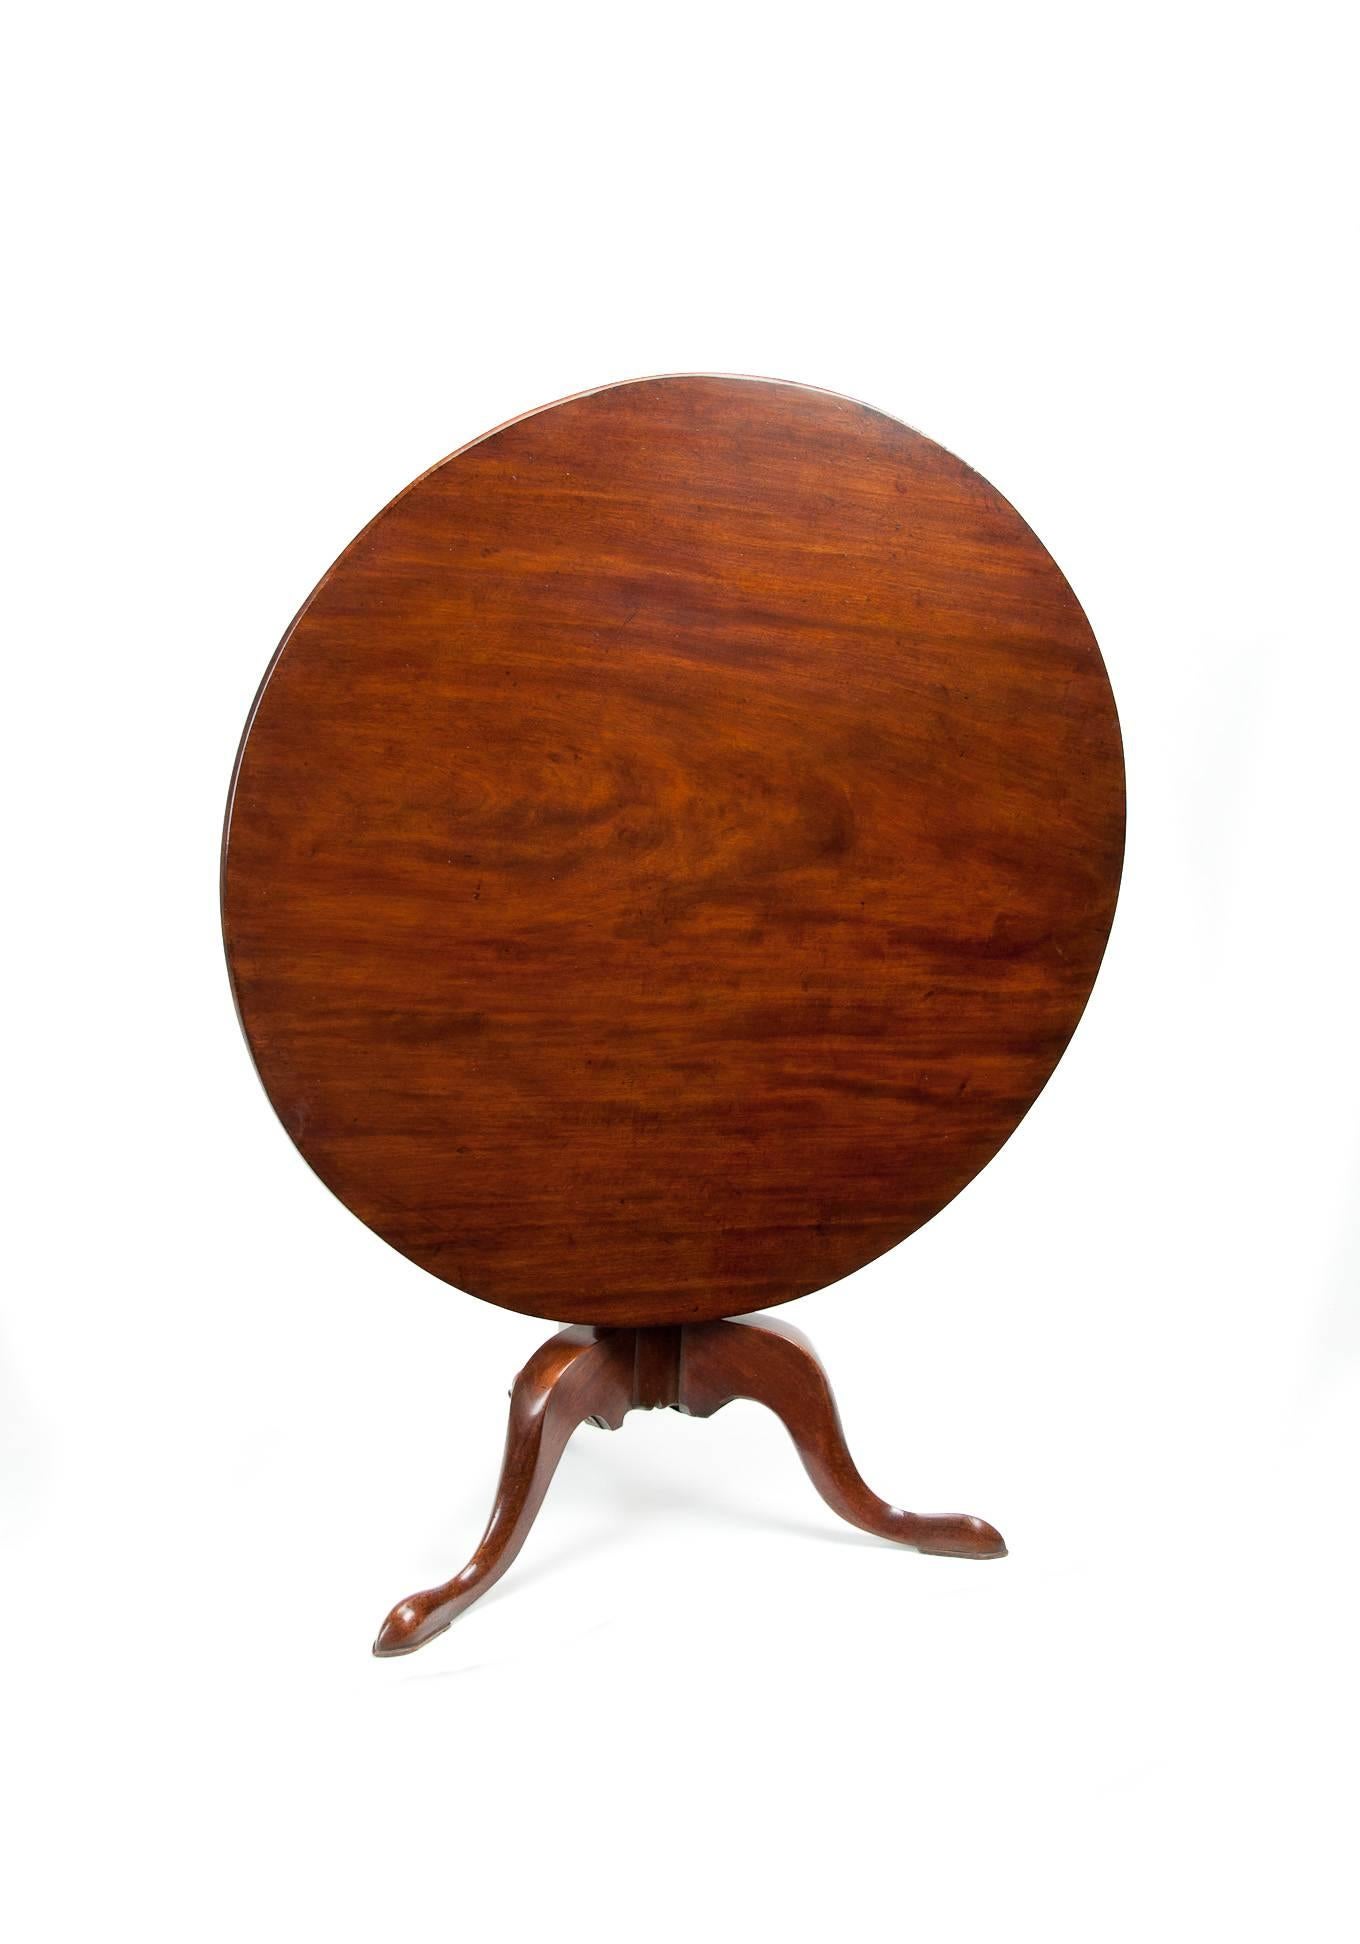 18th Century George III Mahogany Tripod Table of Large Proportions